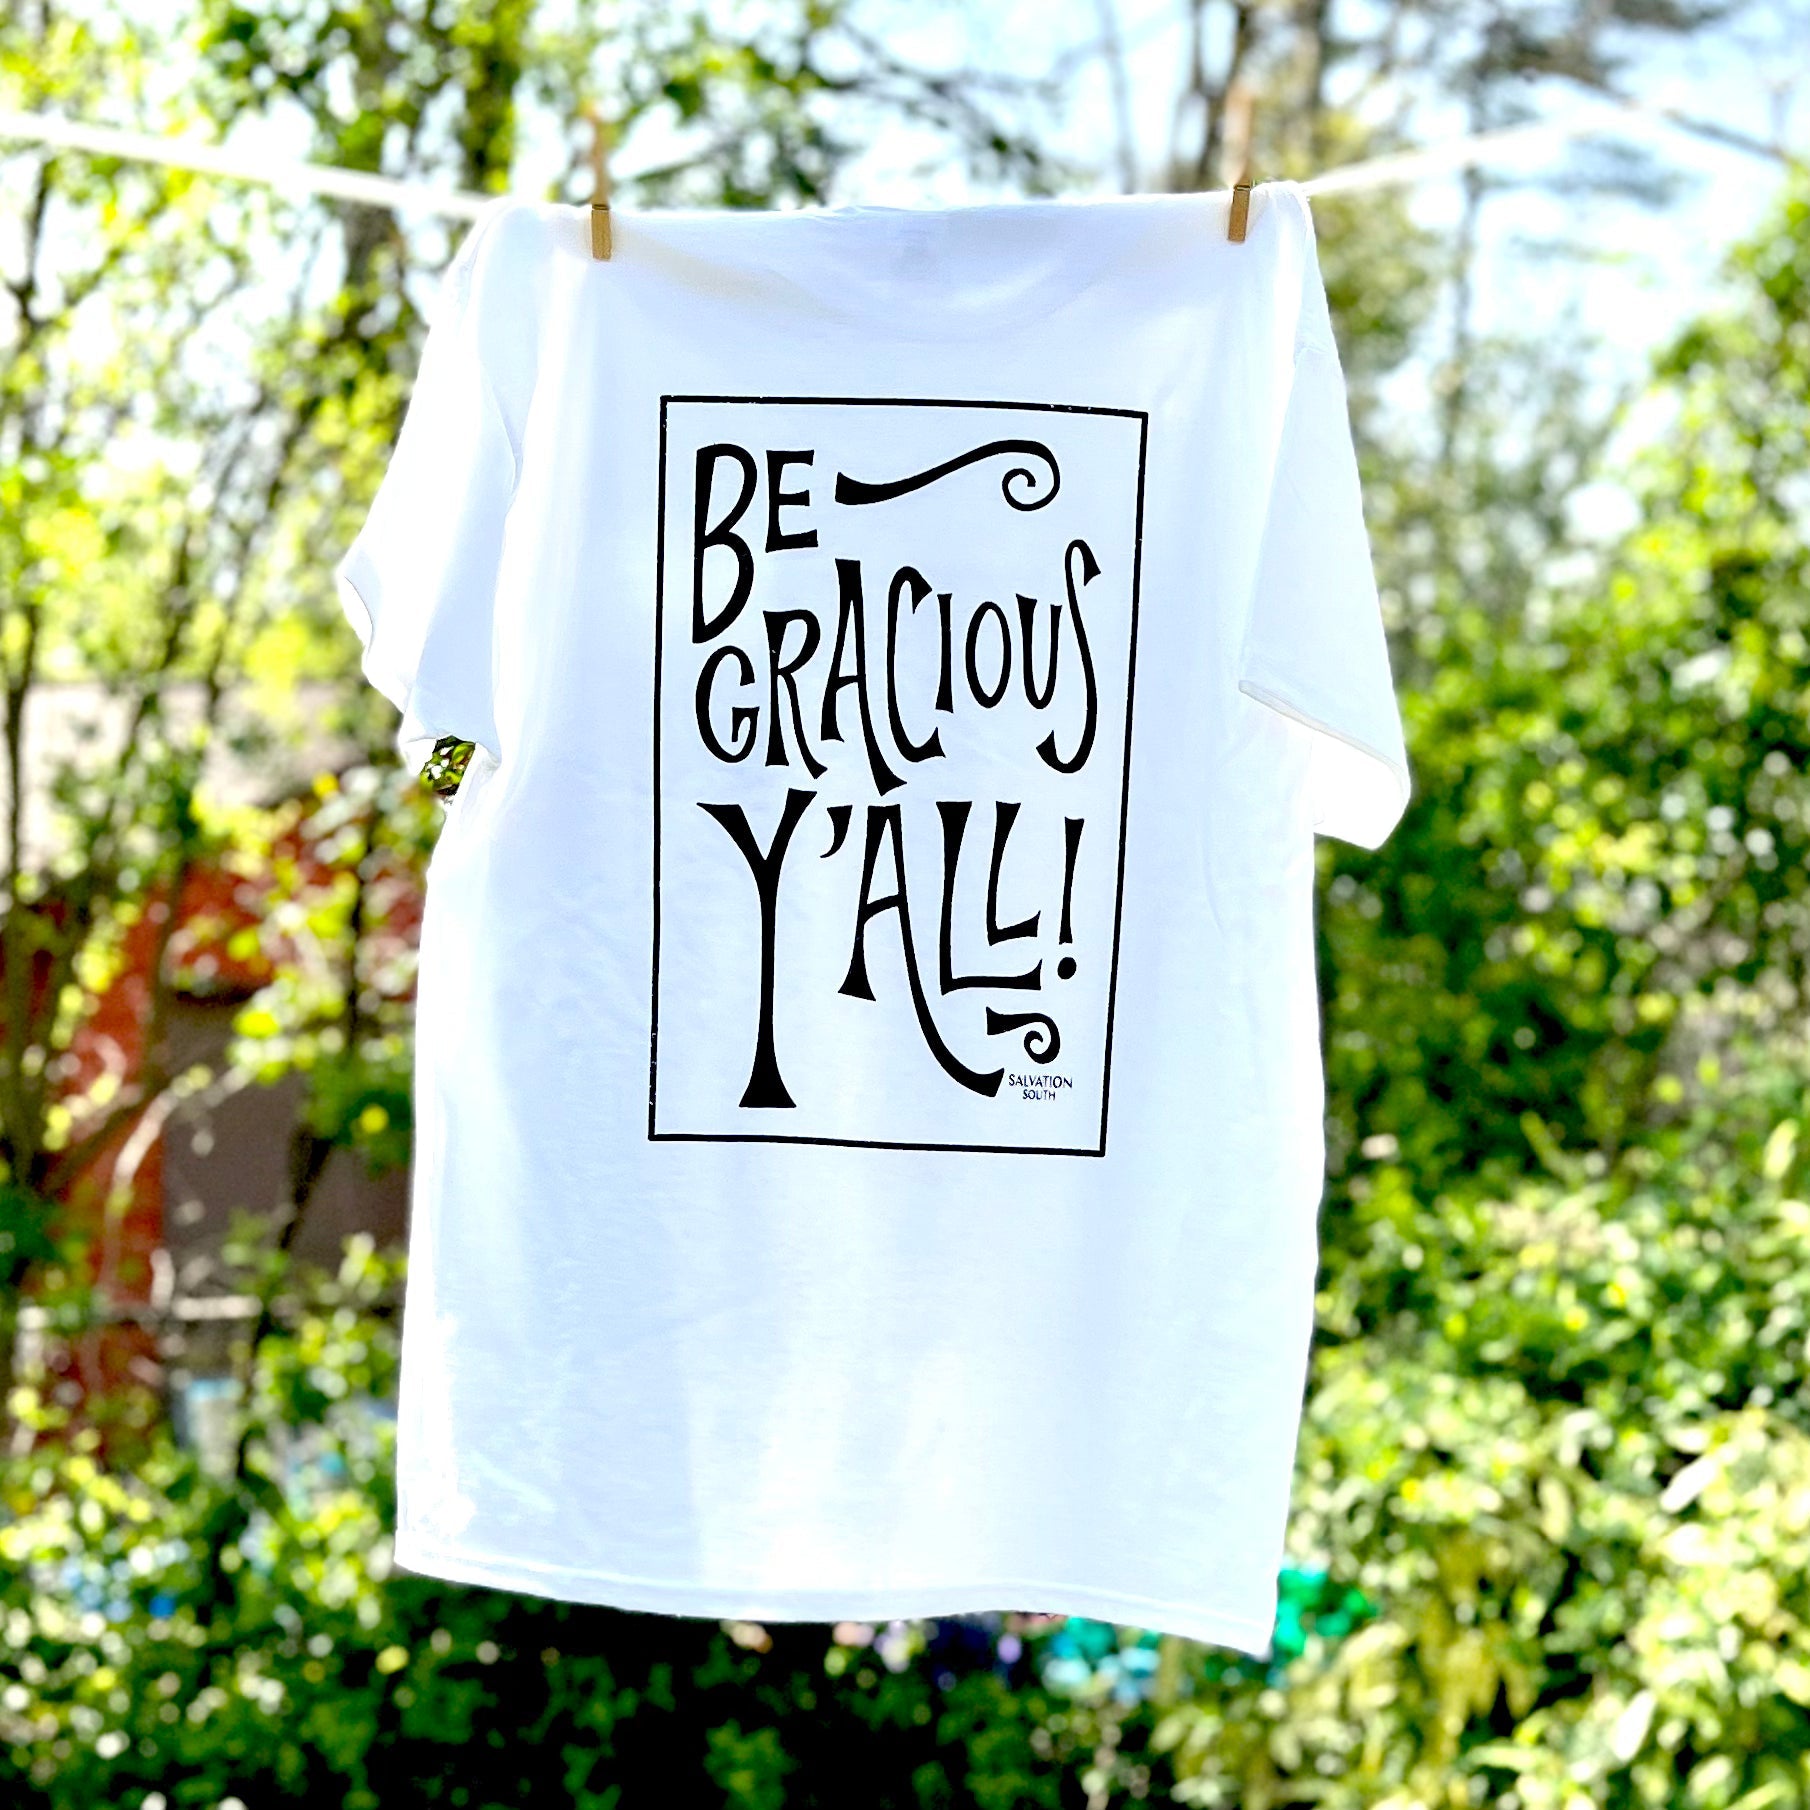 Salvation South - The Be Gracious Y'all T-shirt on a clothesline